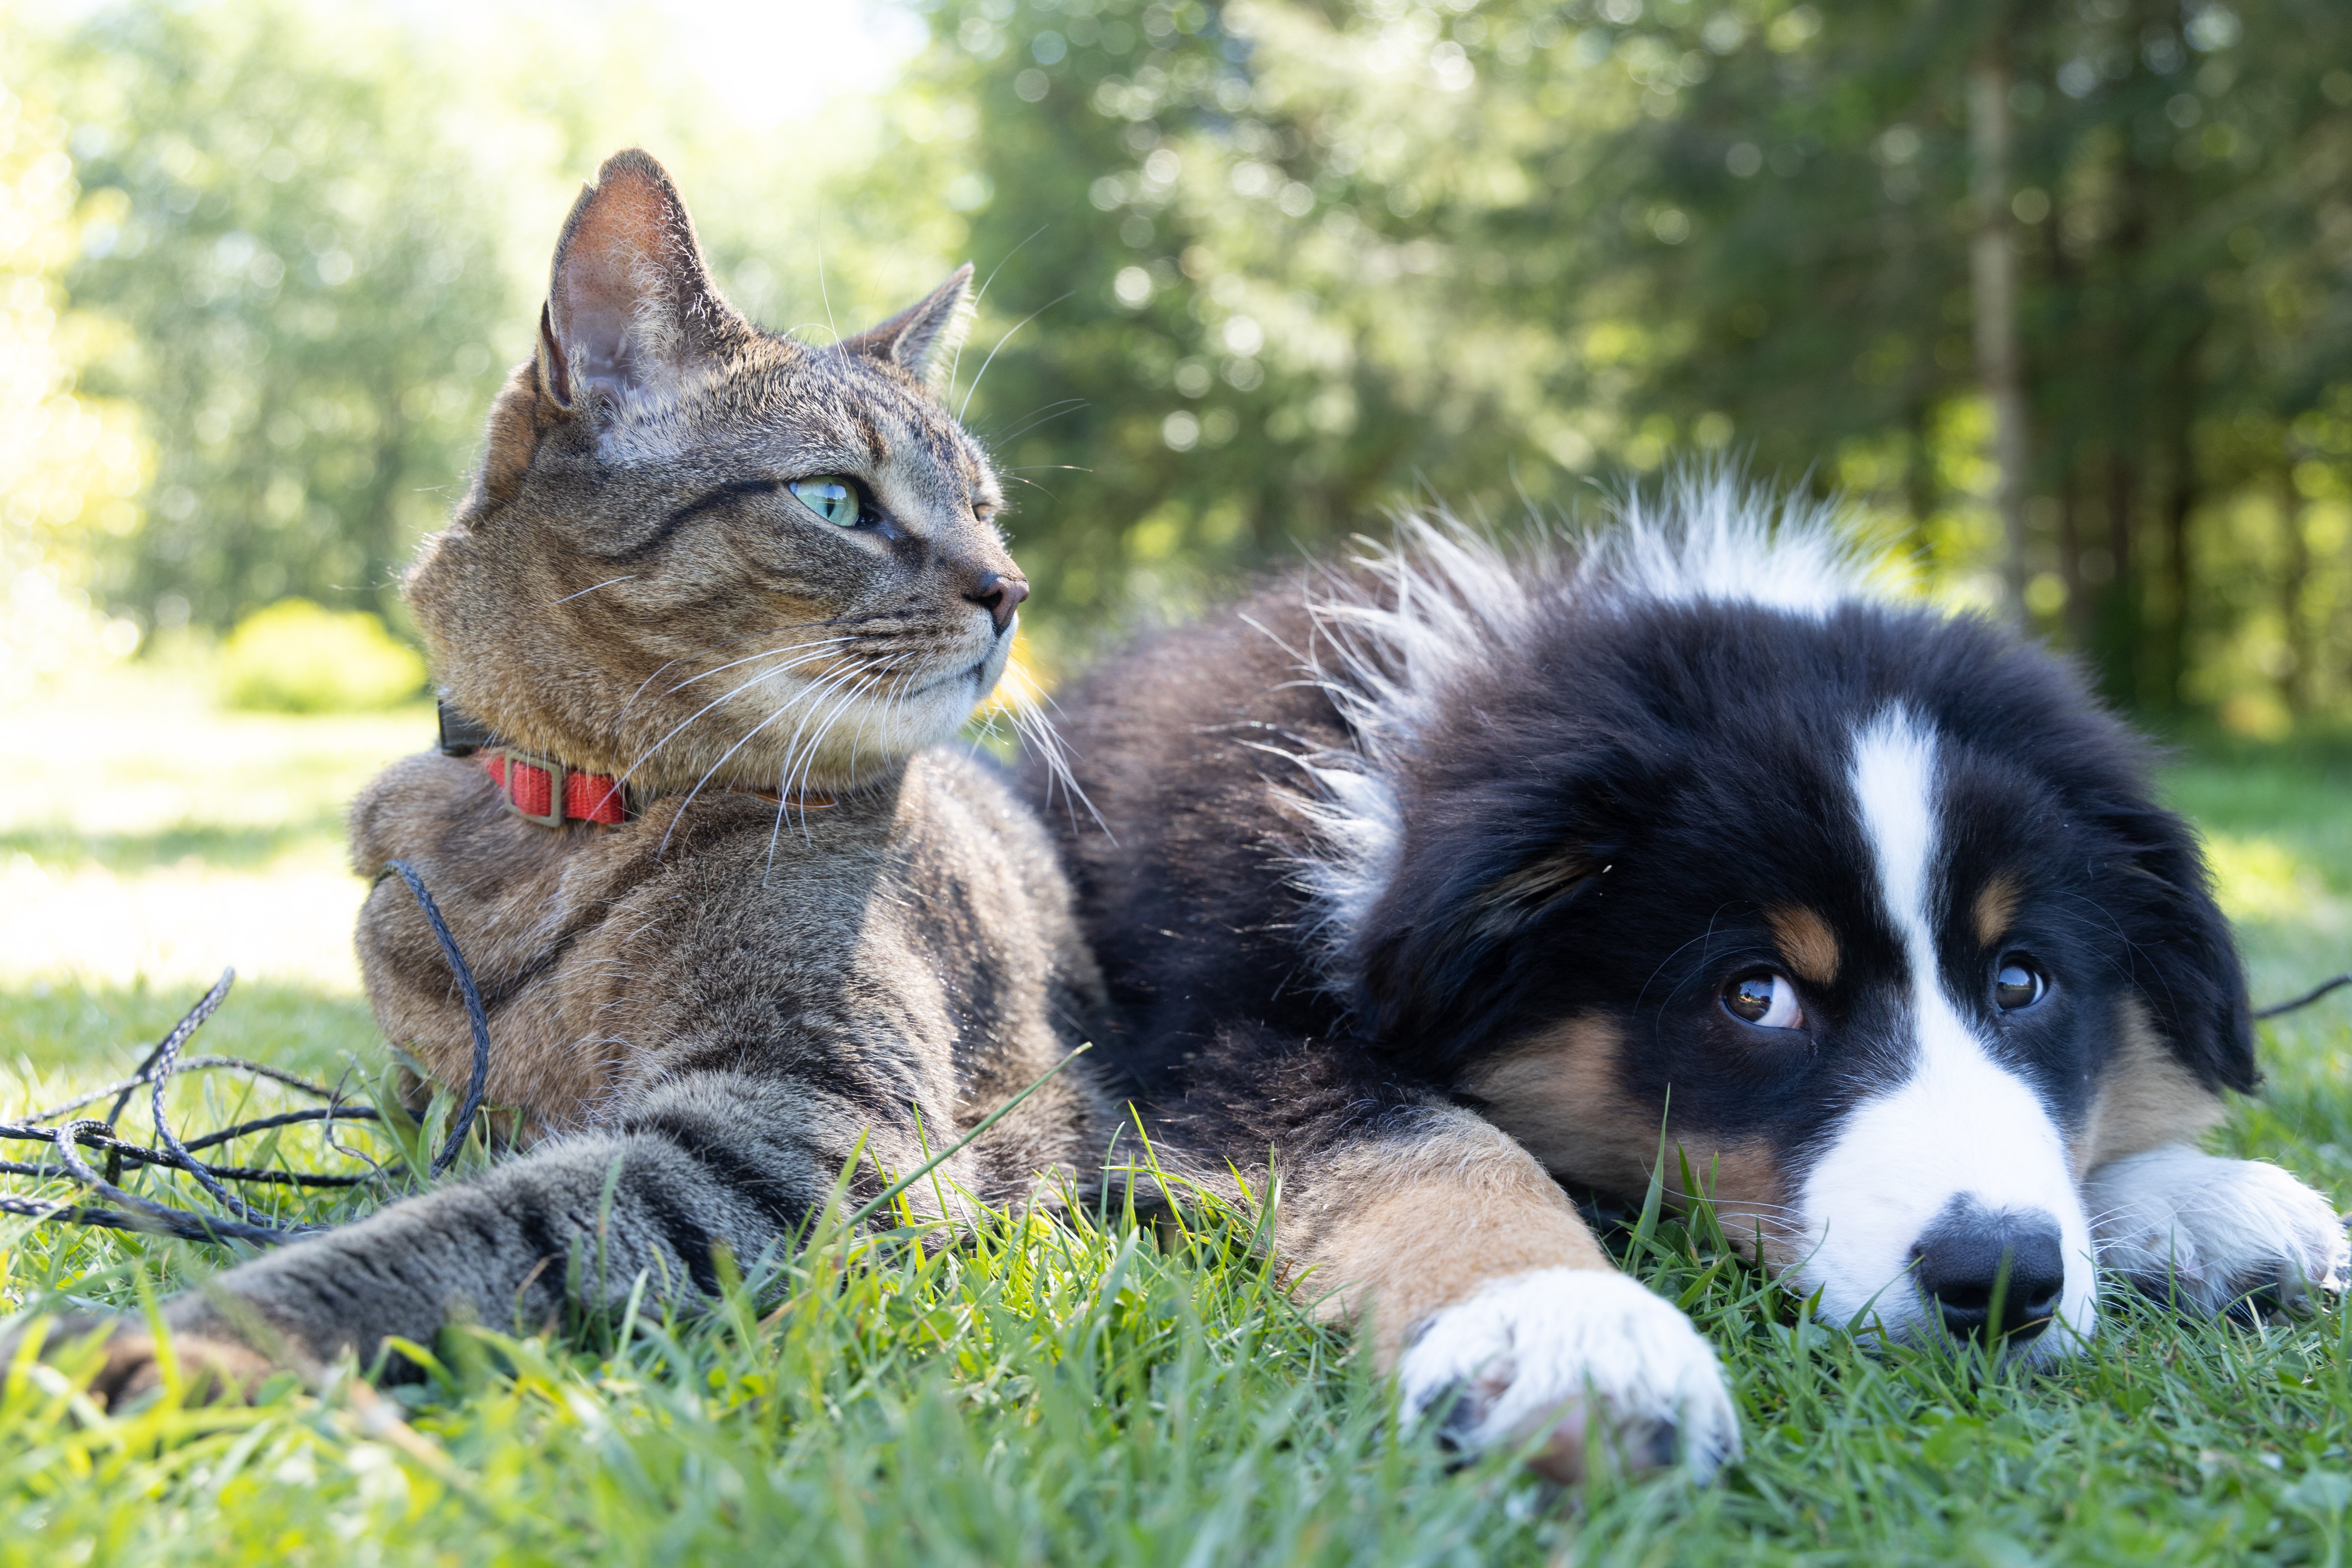 Cat and dog together in the park